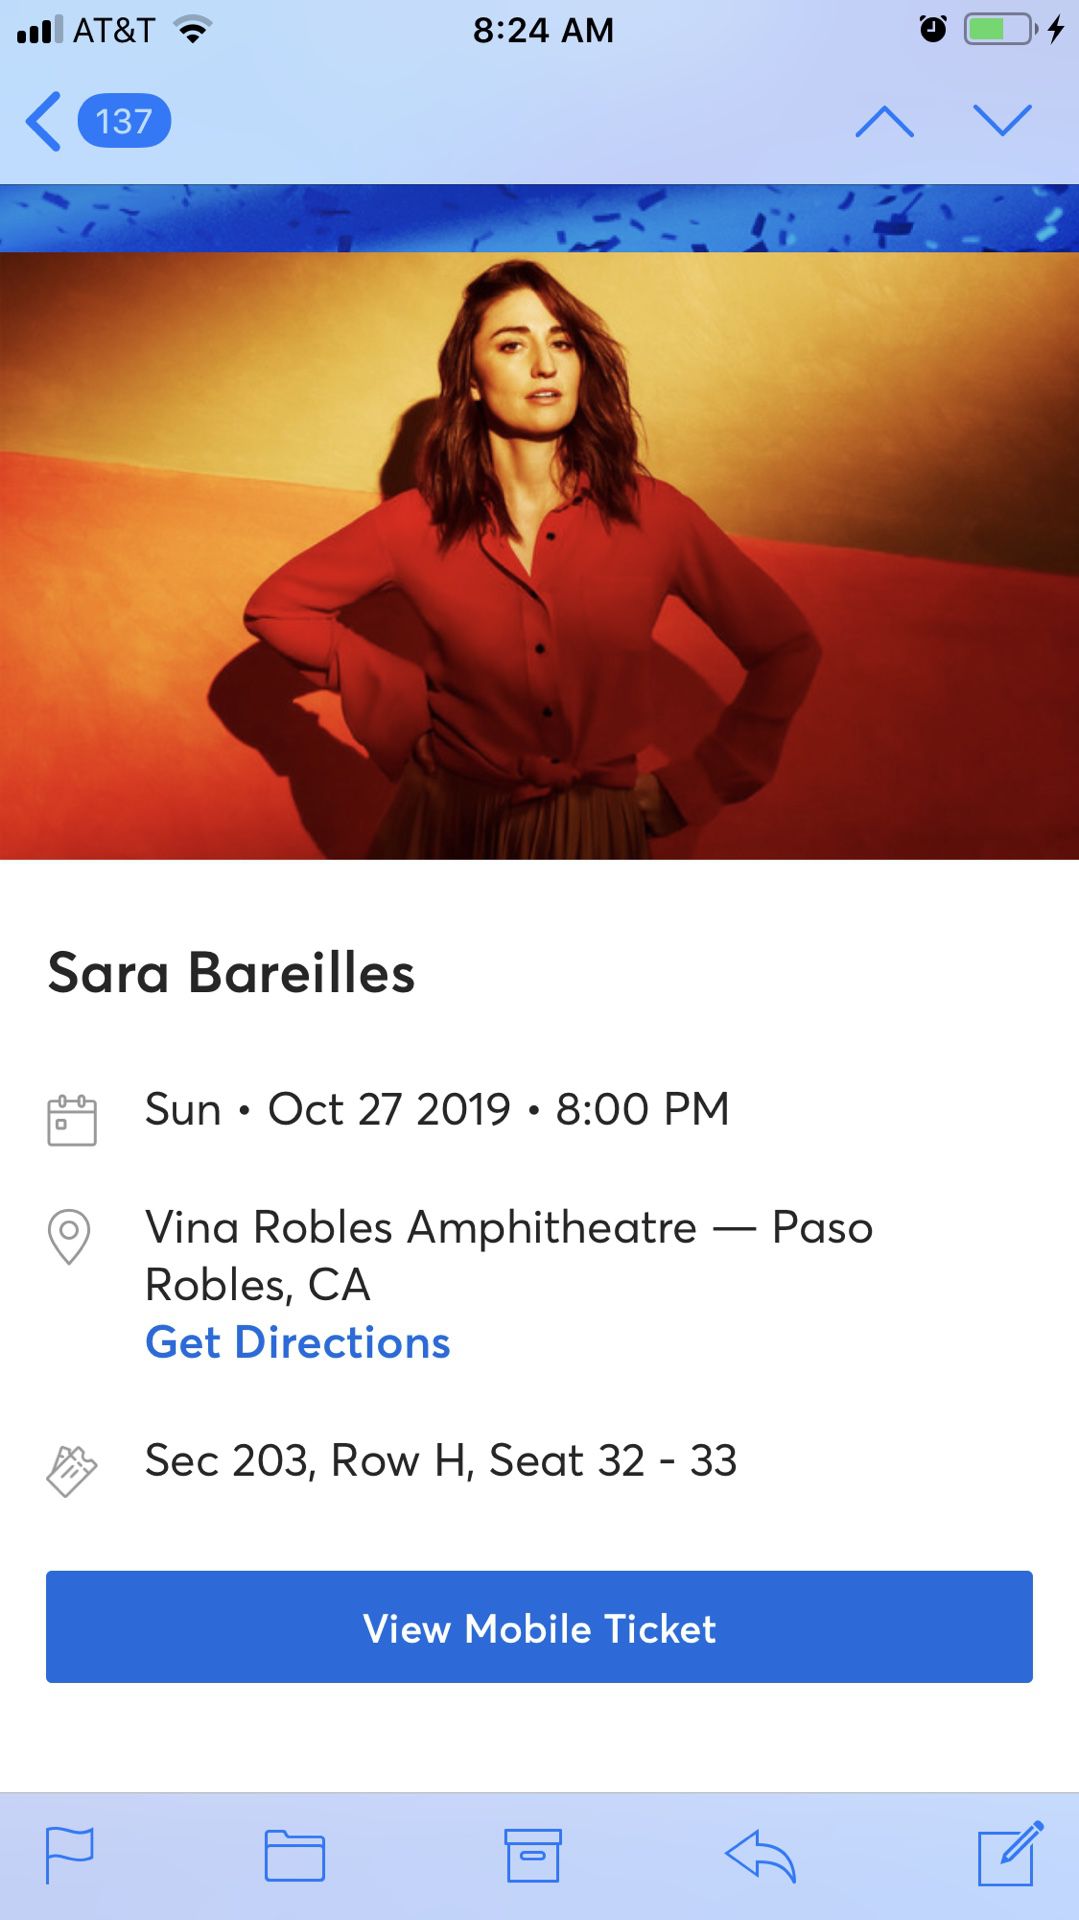 Sara Bareilles . 2 tickets to sold out concert.